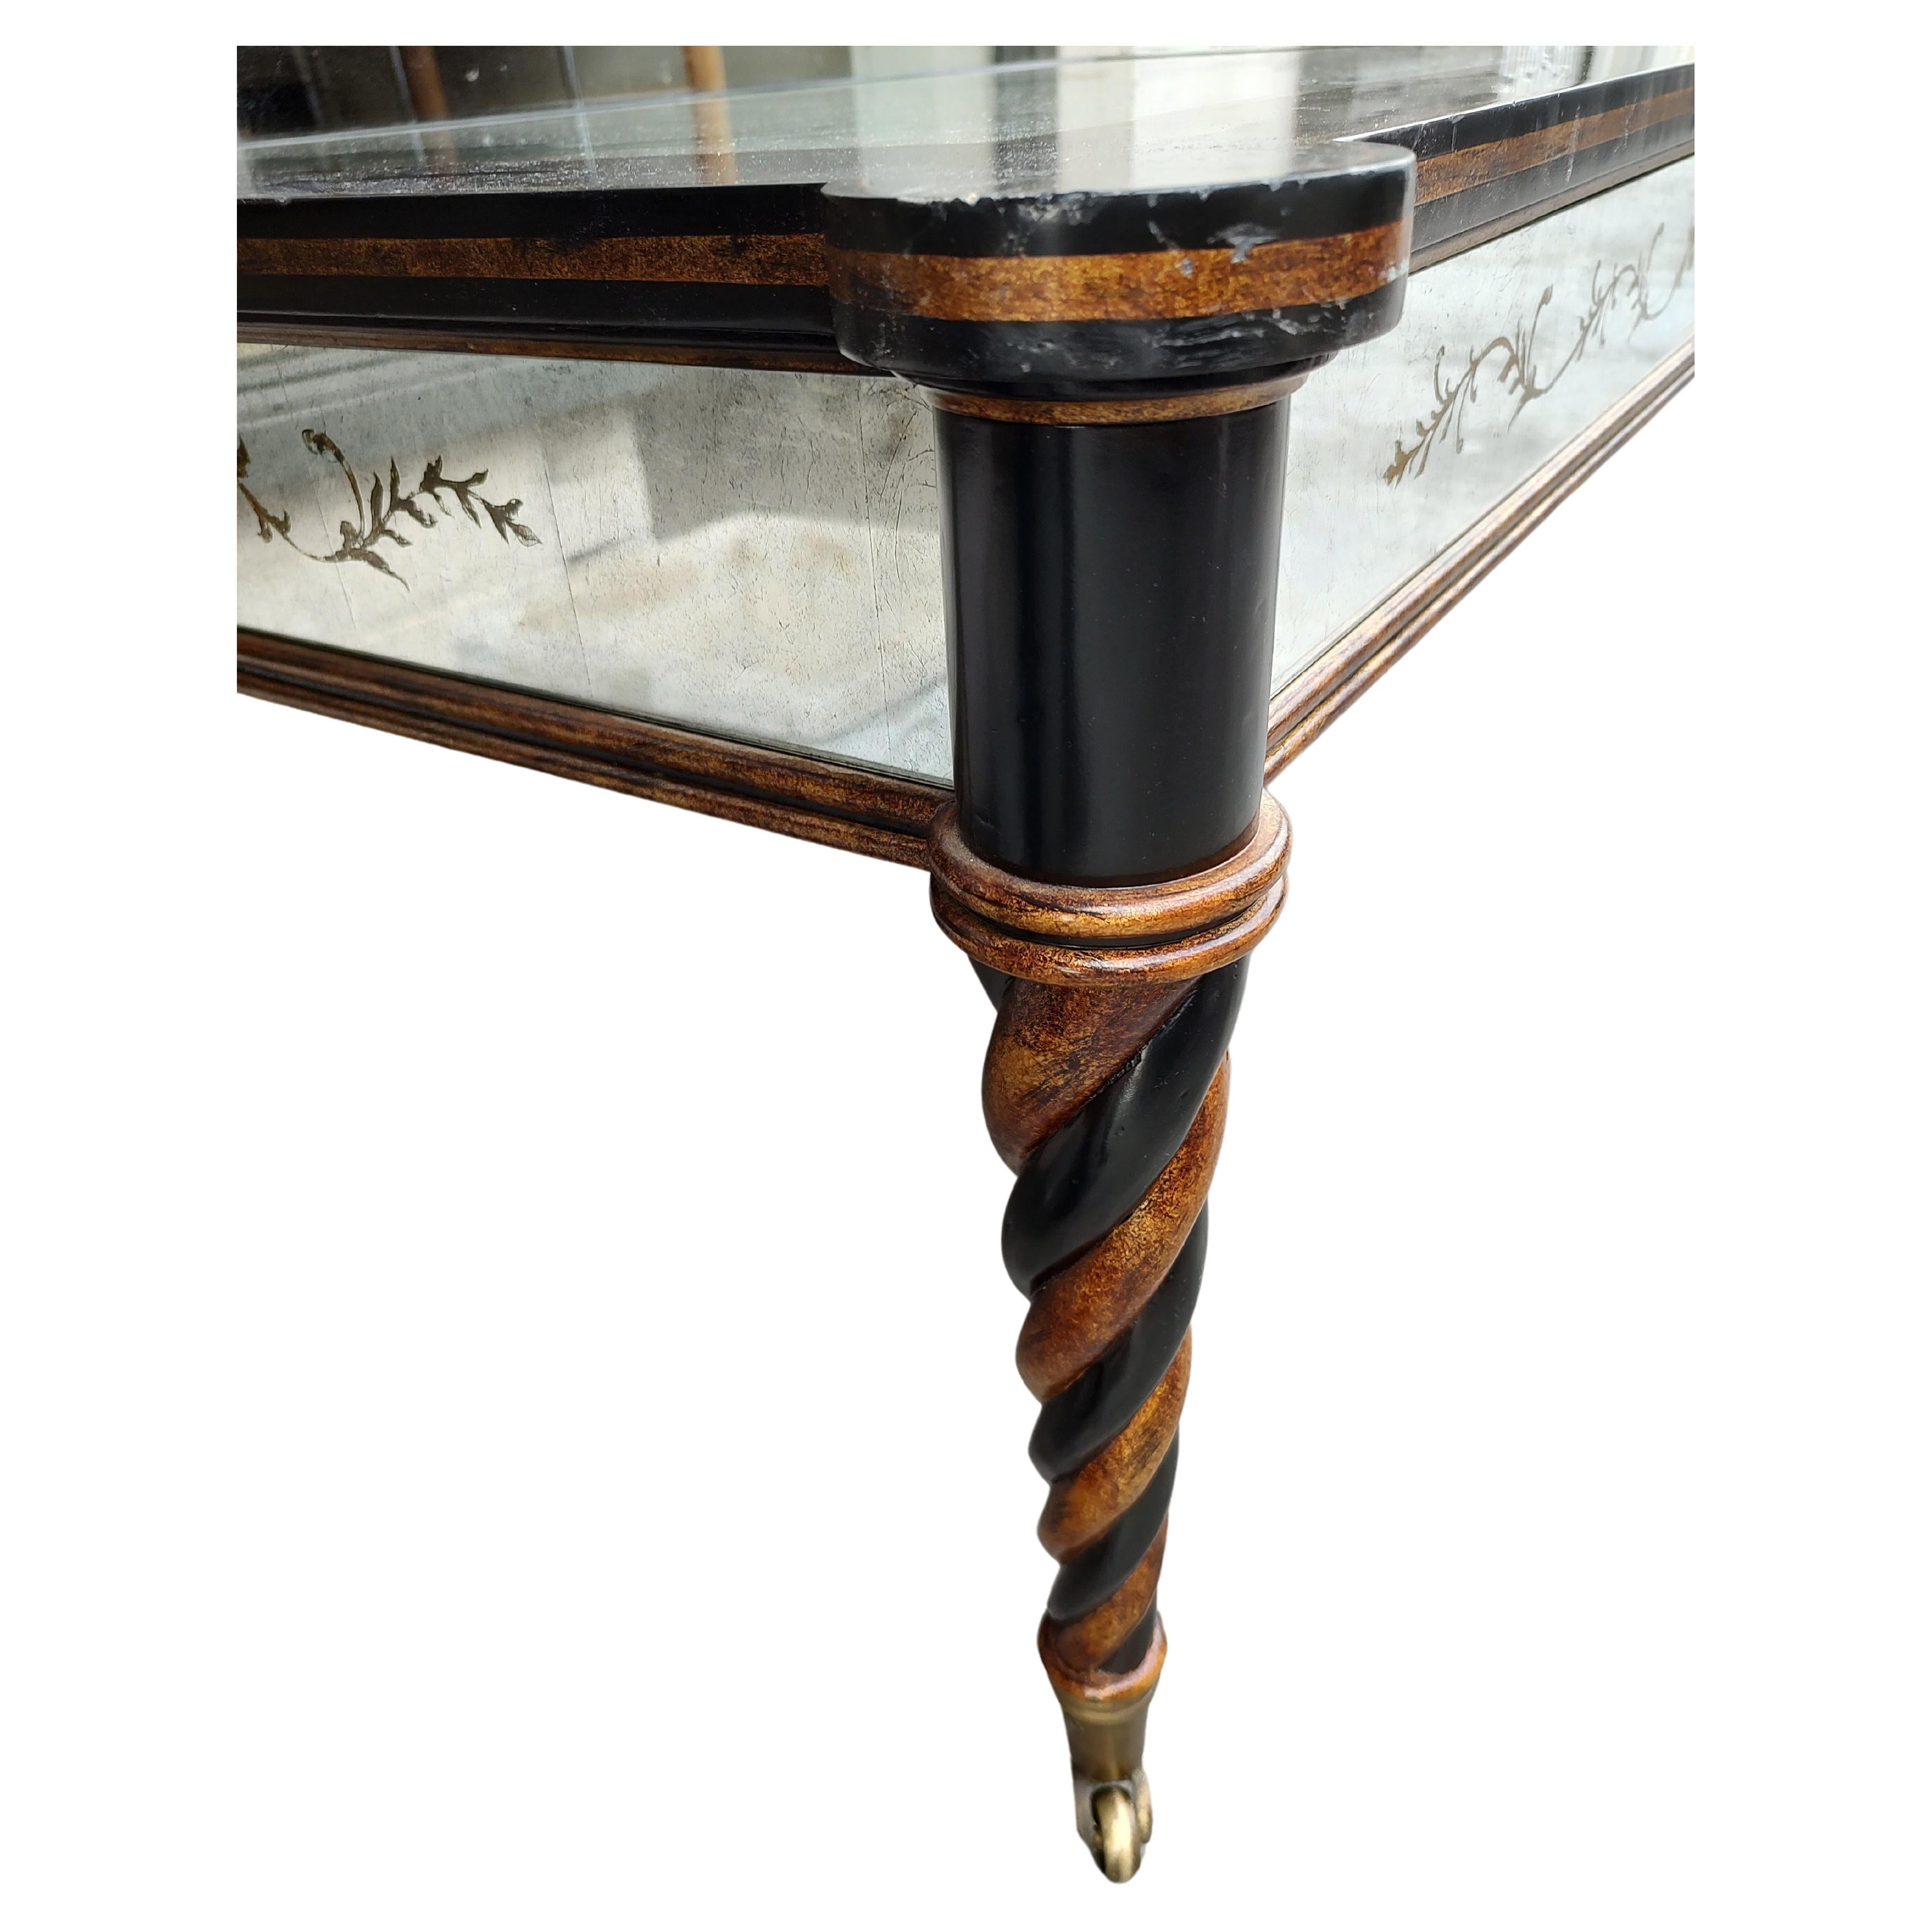 Appliqué Neoclassical Sheraton Style Cocktail Table with Eglomise Mirrored Panels For Sale